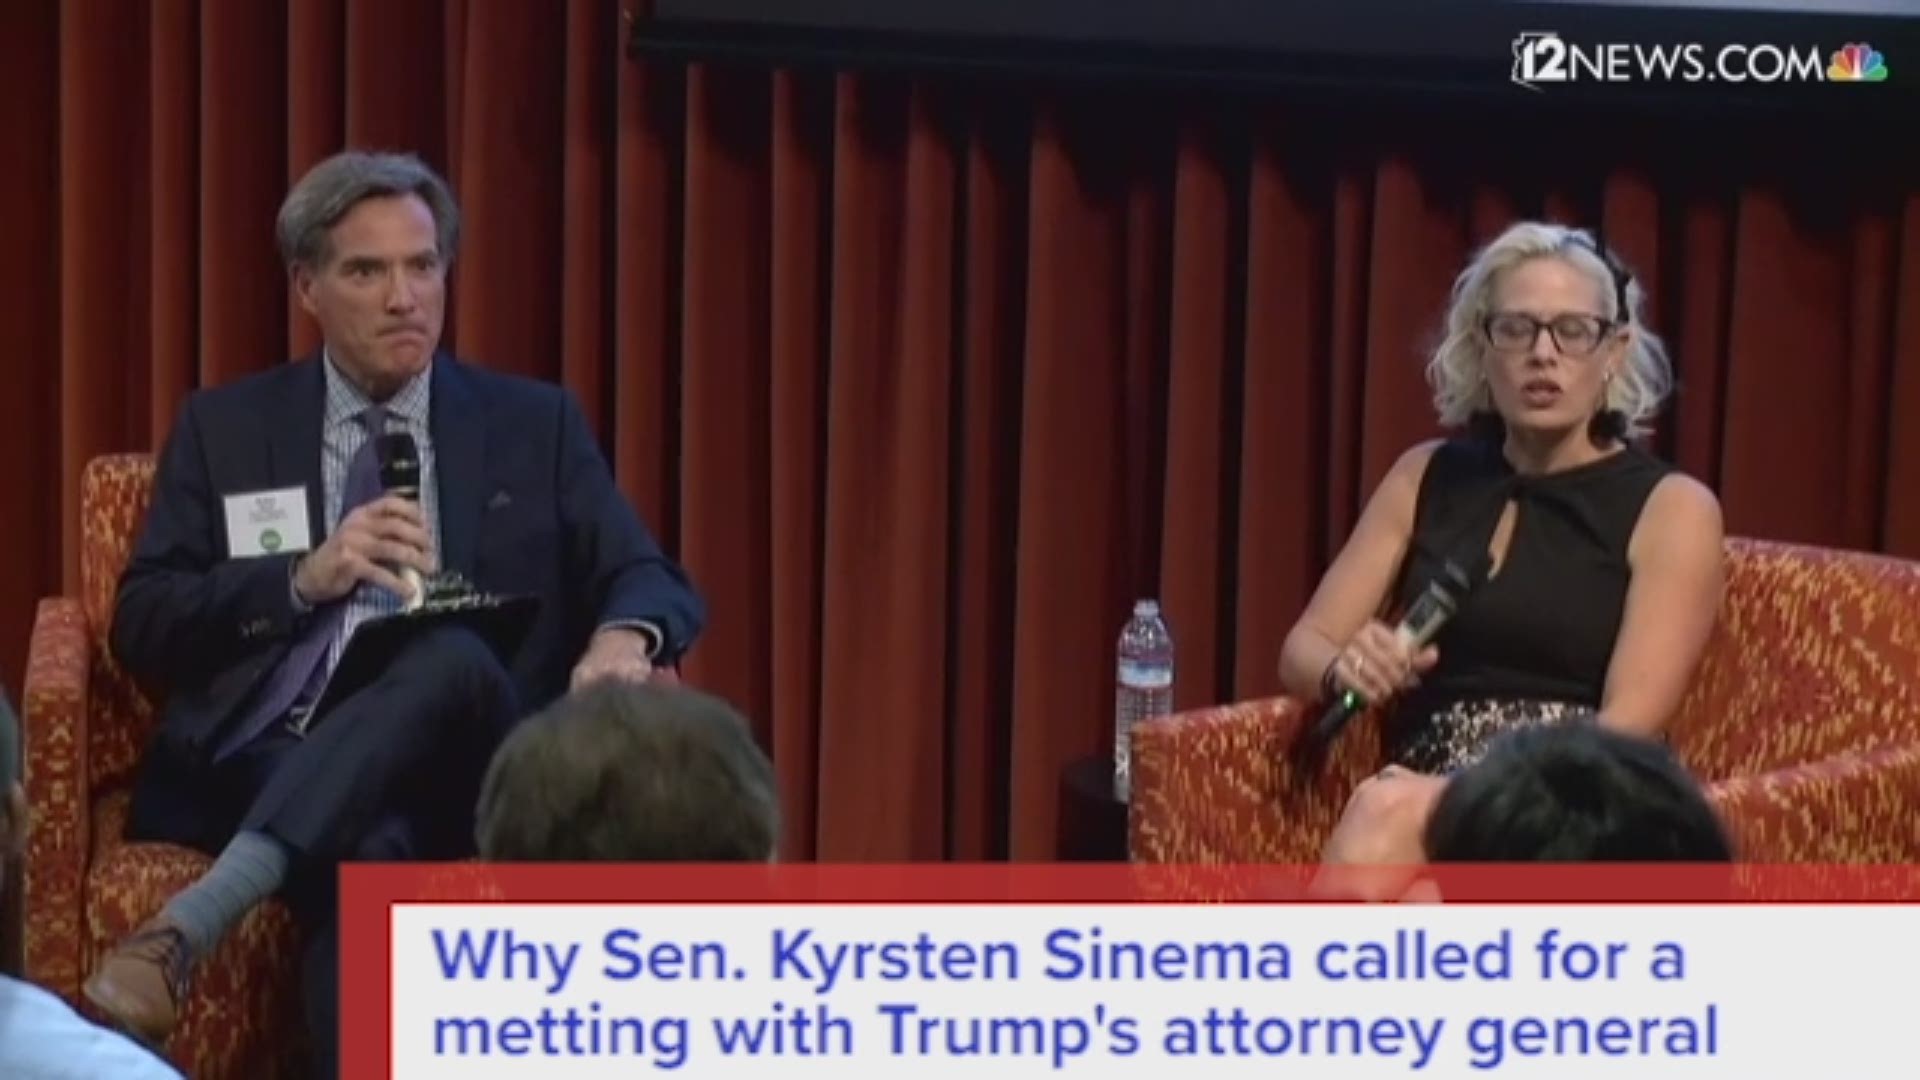 In an interview with 12 News’ Brahm Resnik at a Phoenix journalism convention, Arizona Sen. Kyrsten Sinema says she was ‘dismayed’ by Attorney General William Barr’s handling of the Mueller report. She has a meeting with Barr scheduled for this week.